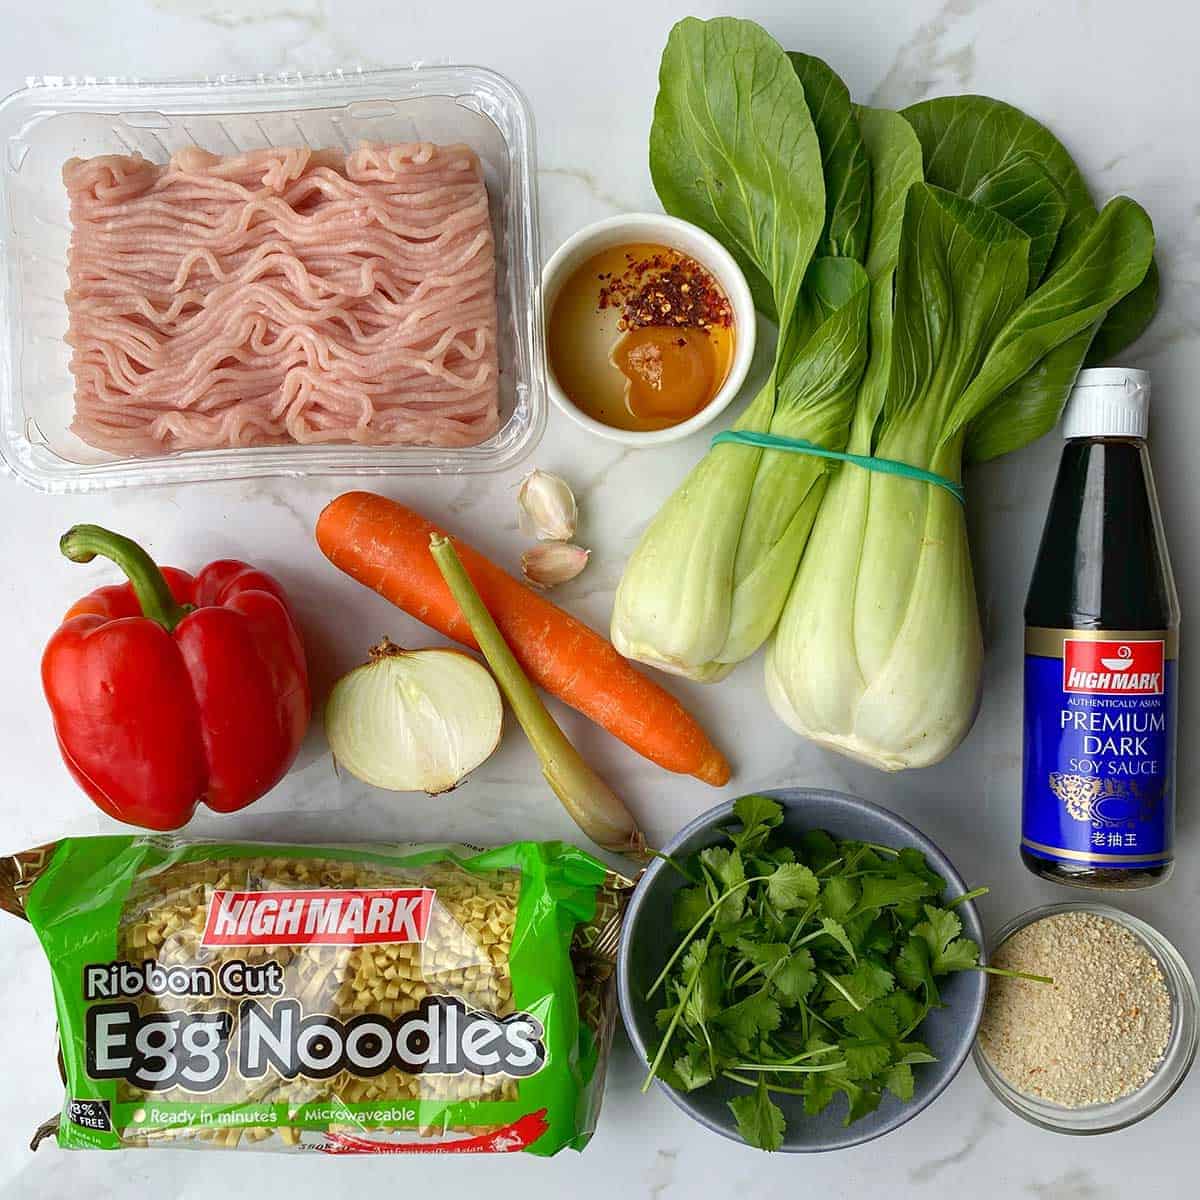 The ingredients for Chicken Meatballs with Noodles sitting on a white bench.